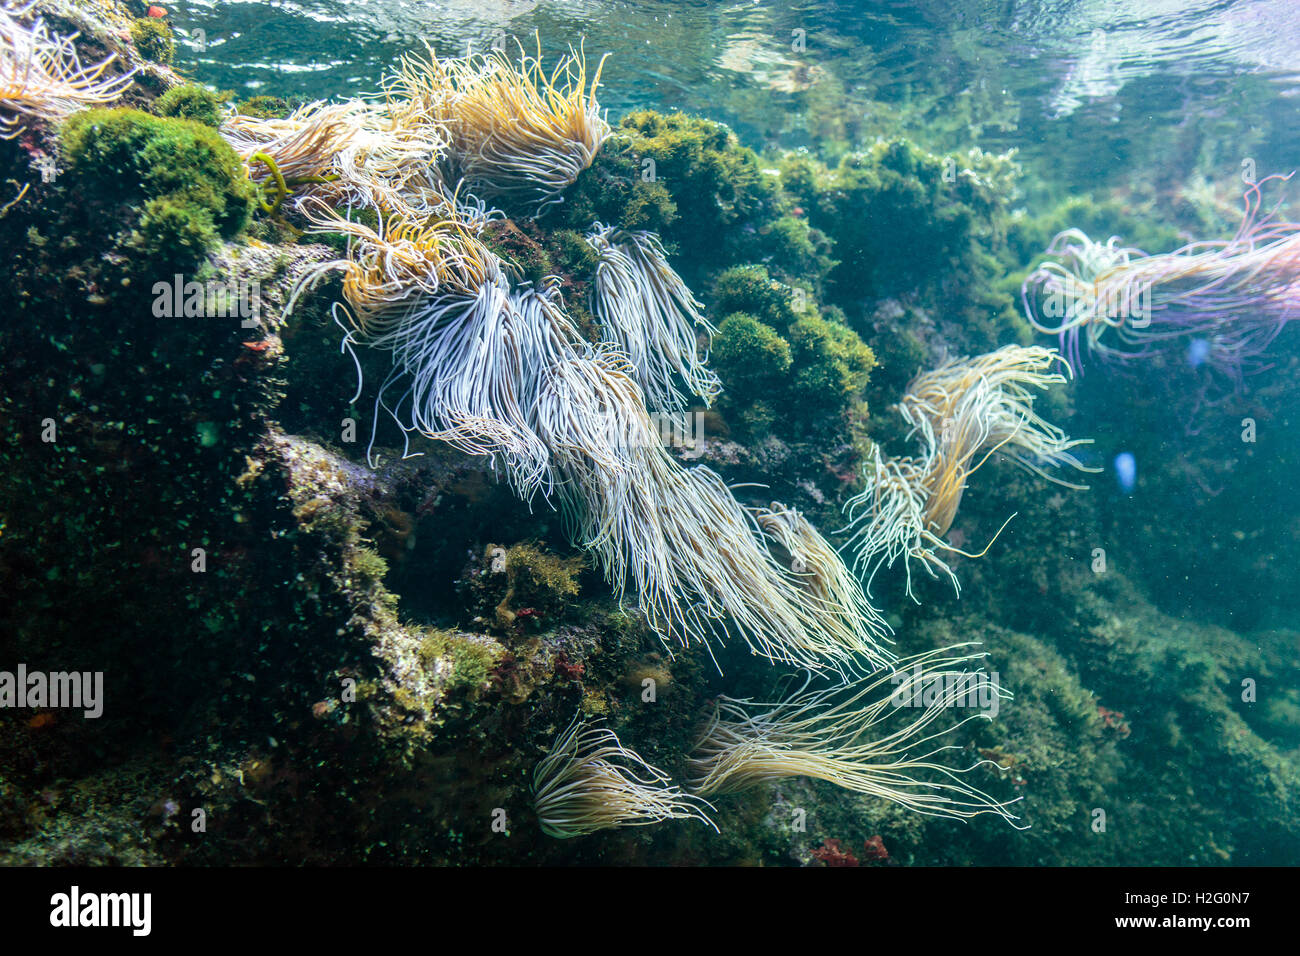 Reef ecosystem underwater with snakelocks anemone and plants Stock Photo